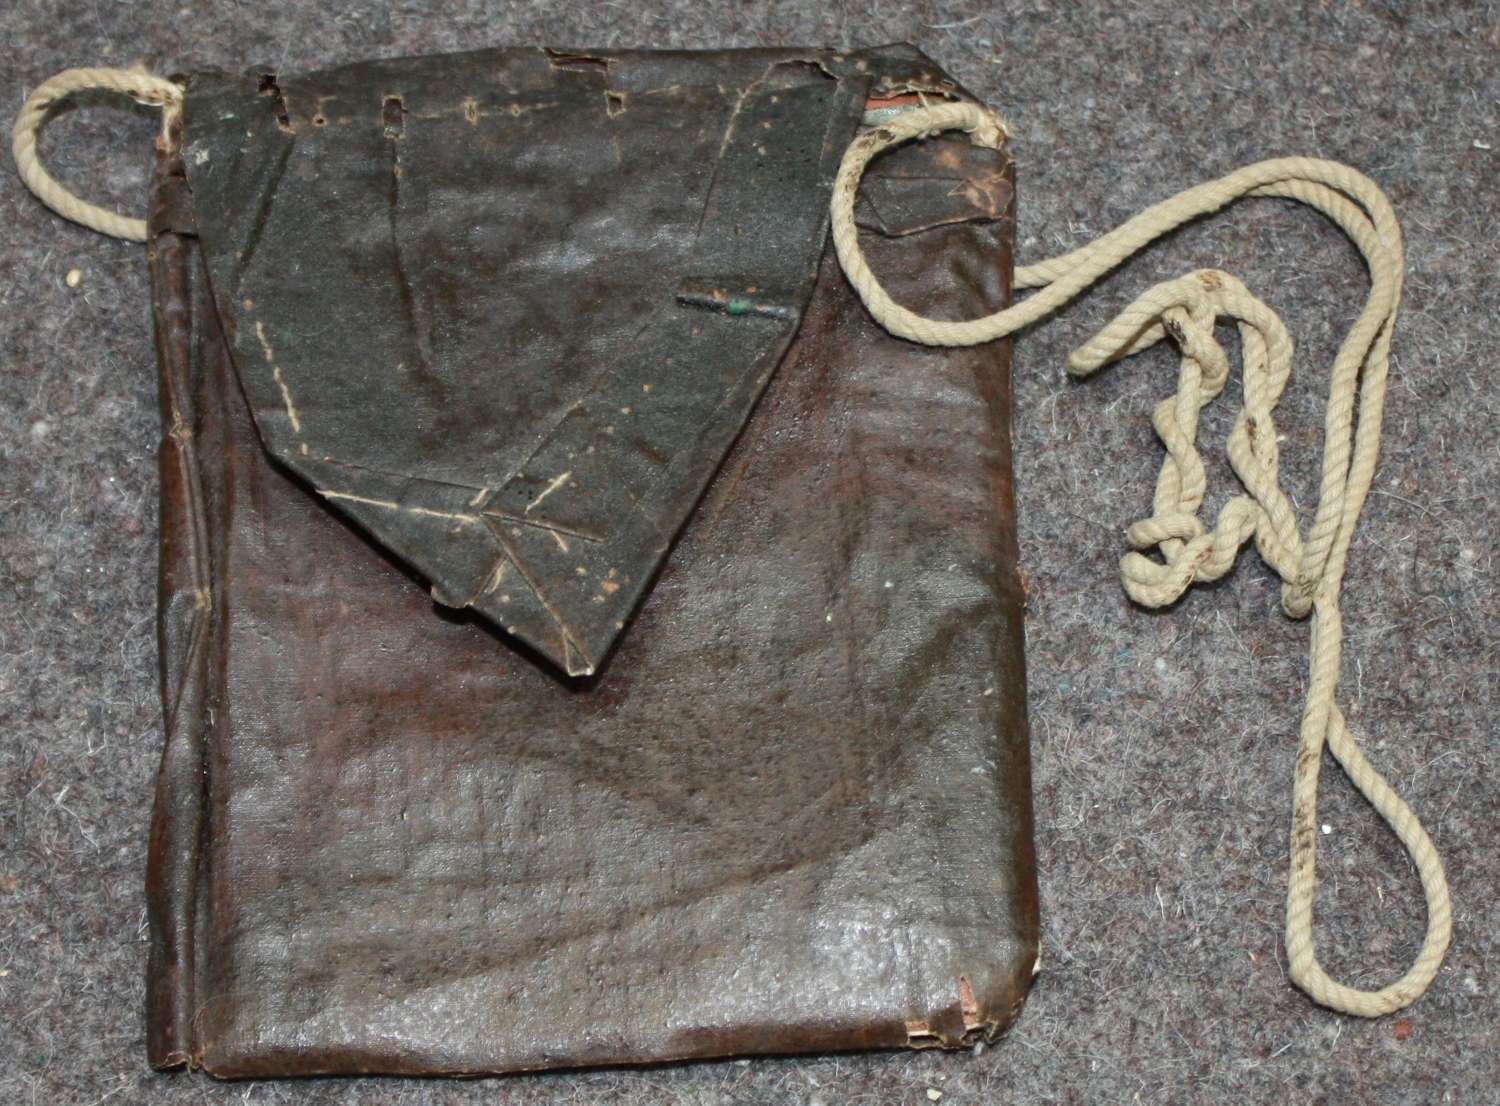 A ROYAL ARMY ORDNANCE CORPS PAY BOOK IN A GAS WALLET